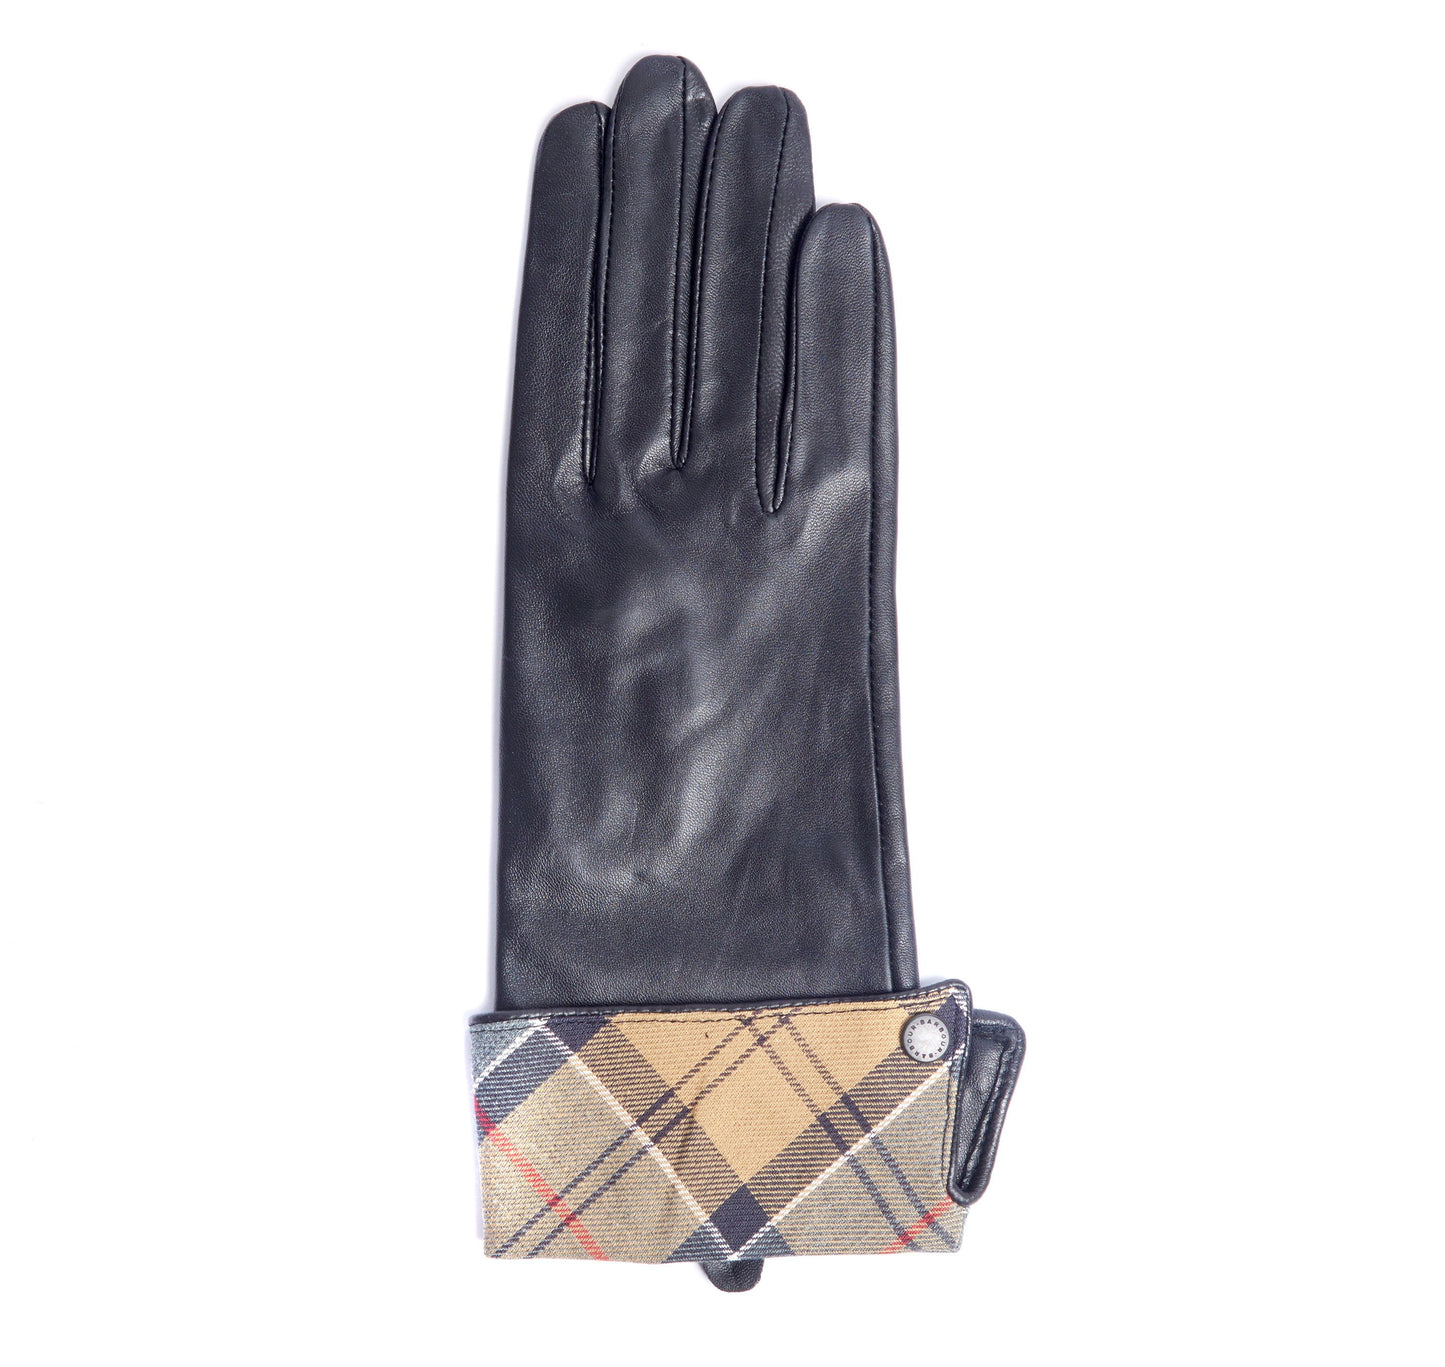 Barbour Glove Woman Jane Leather